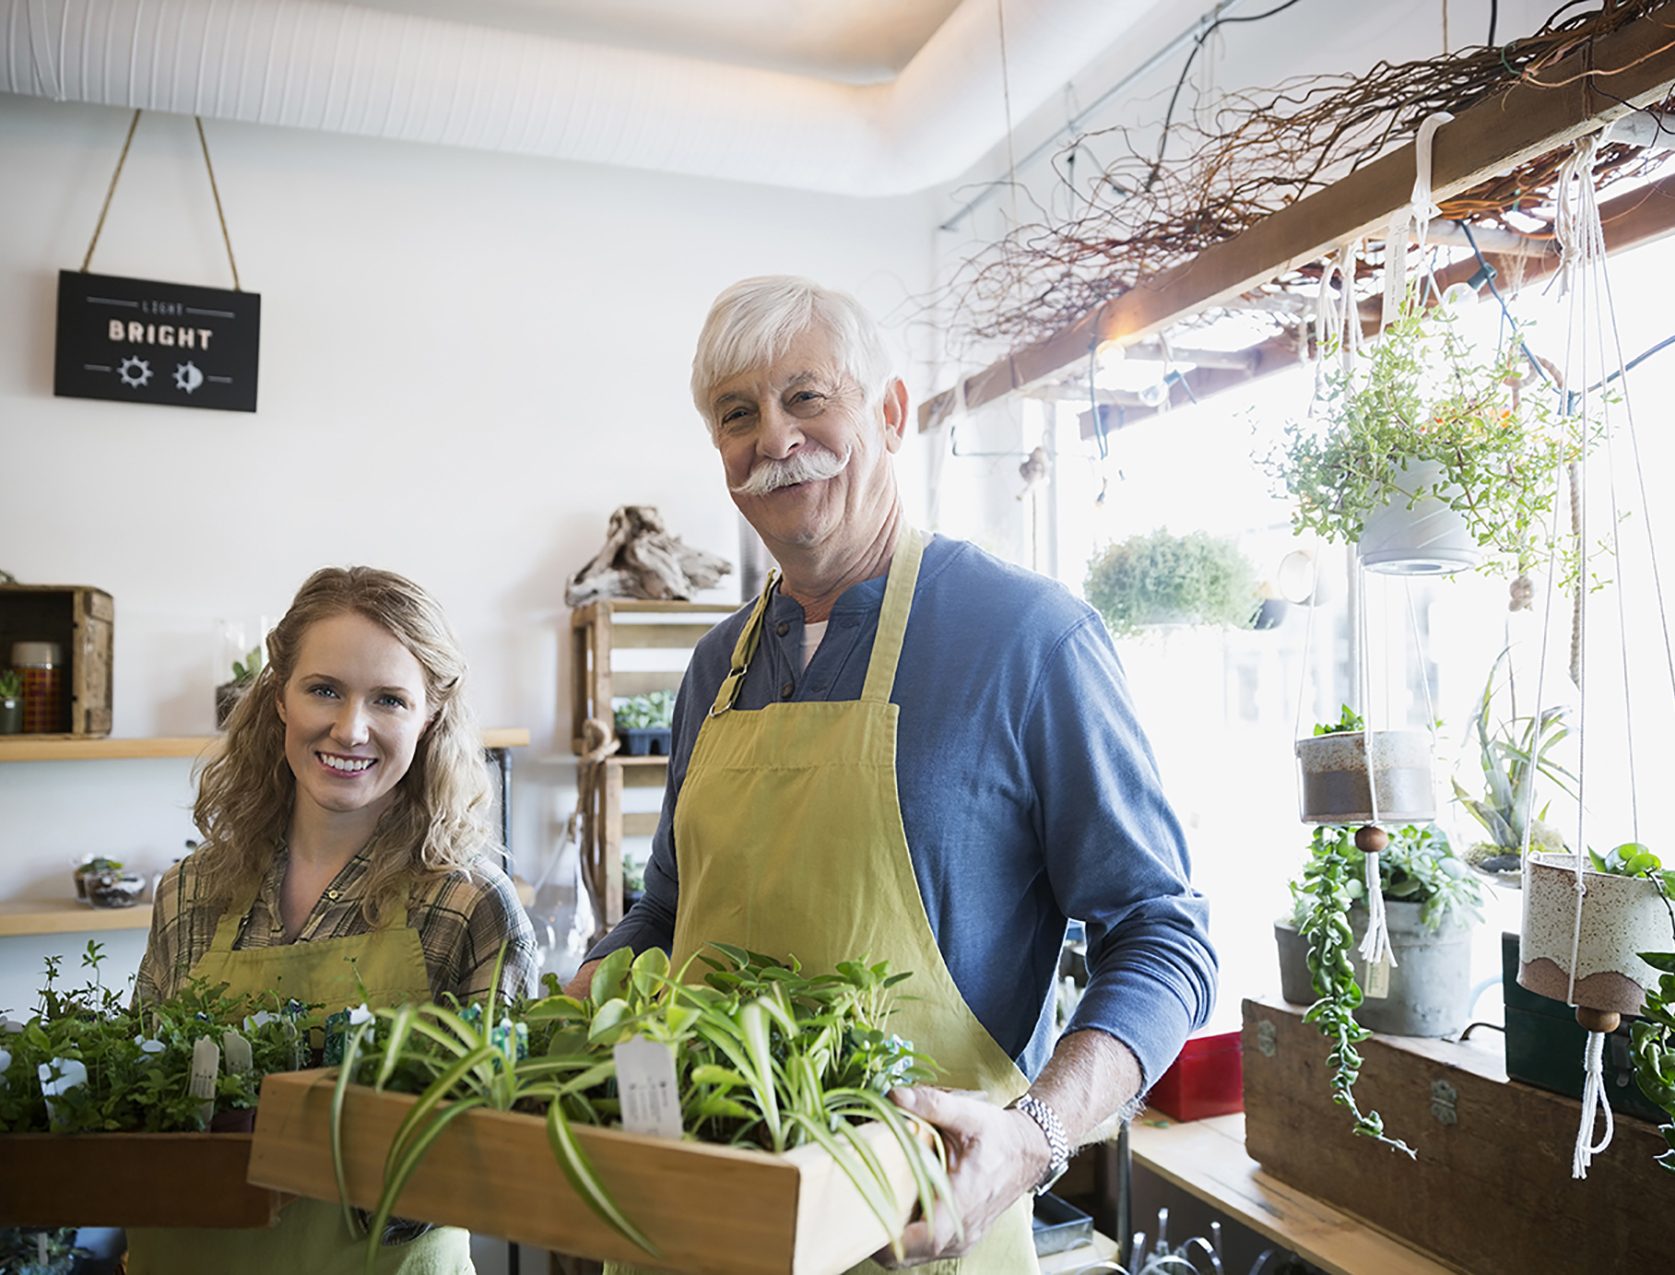 Starting a business and over 50? You won't be alone